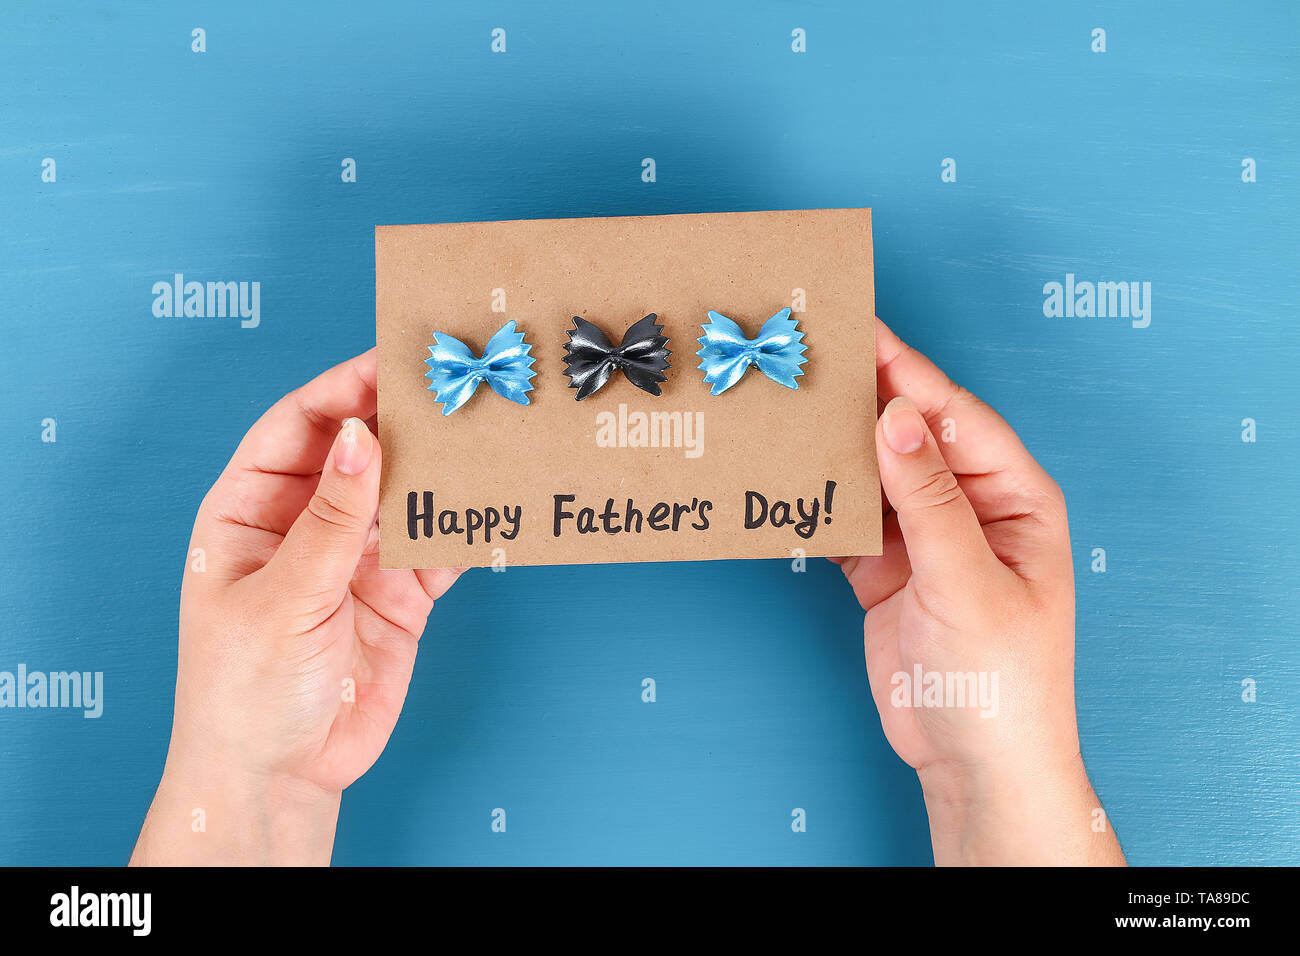 7 Diy Greeting Card Father S Dad Day From Pasta Form Bow Tie Blue Background Gift Idea Decor Father Day Daddy Step By Step Top View Process Kid Stock Photo Alamy